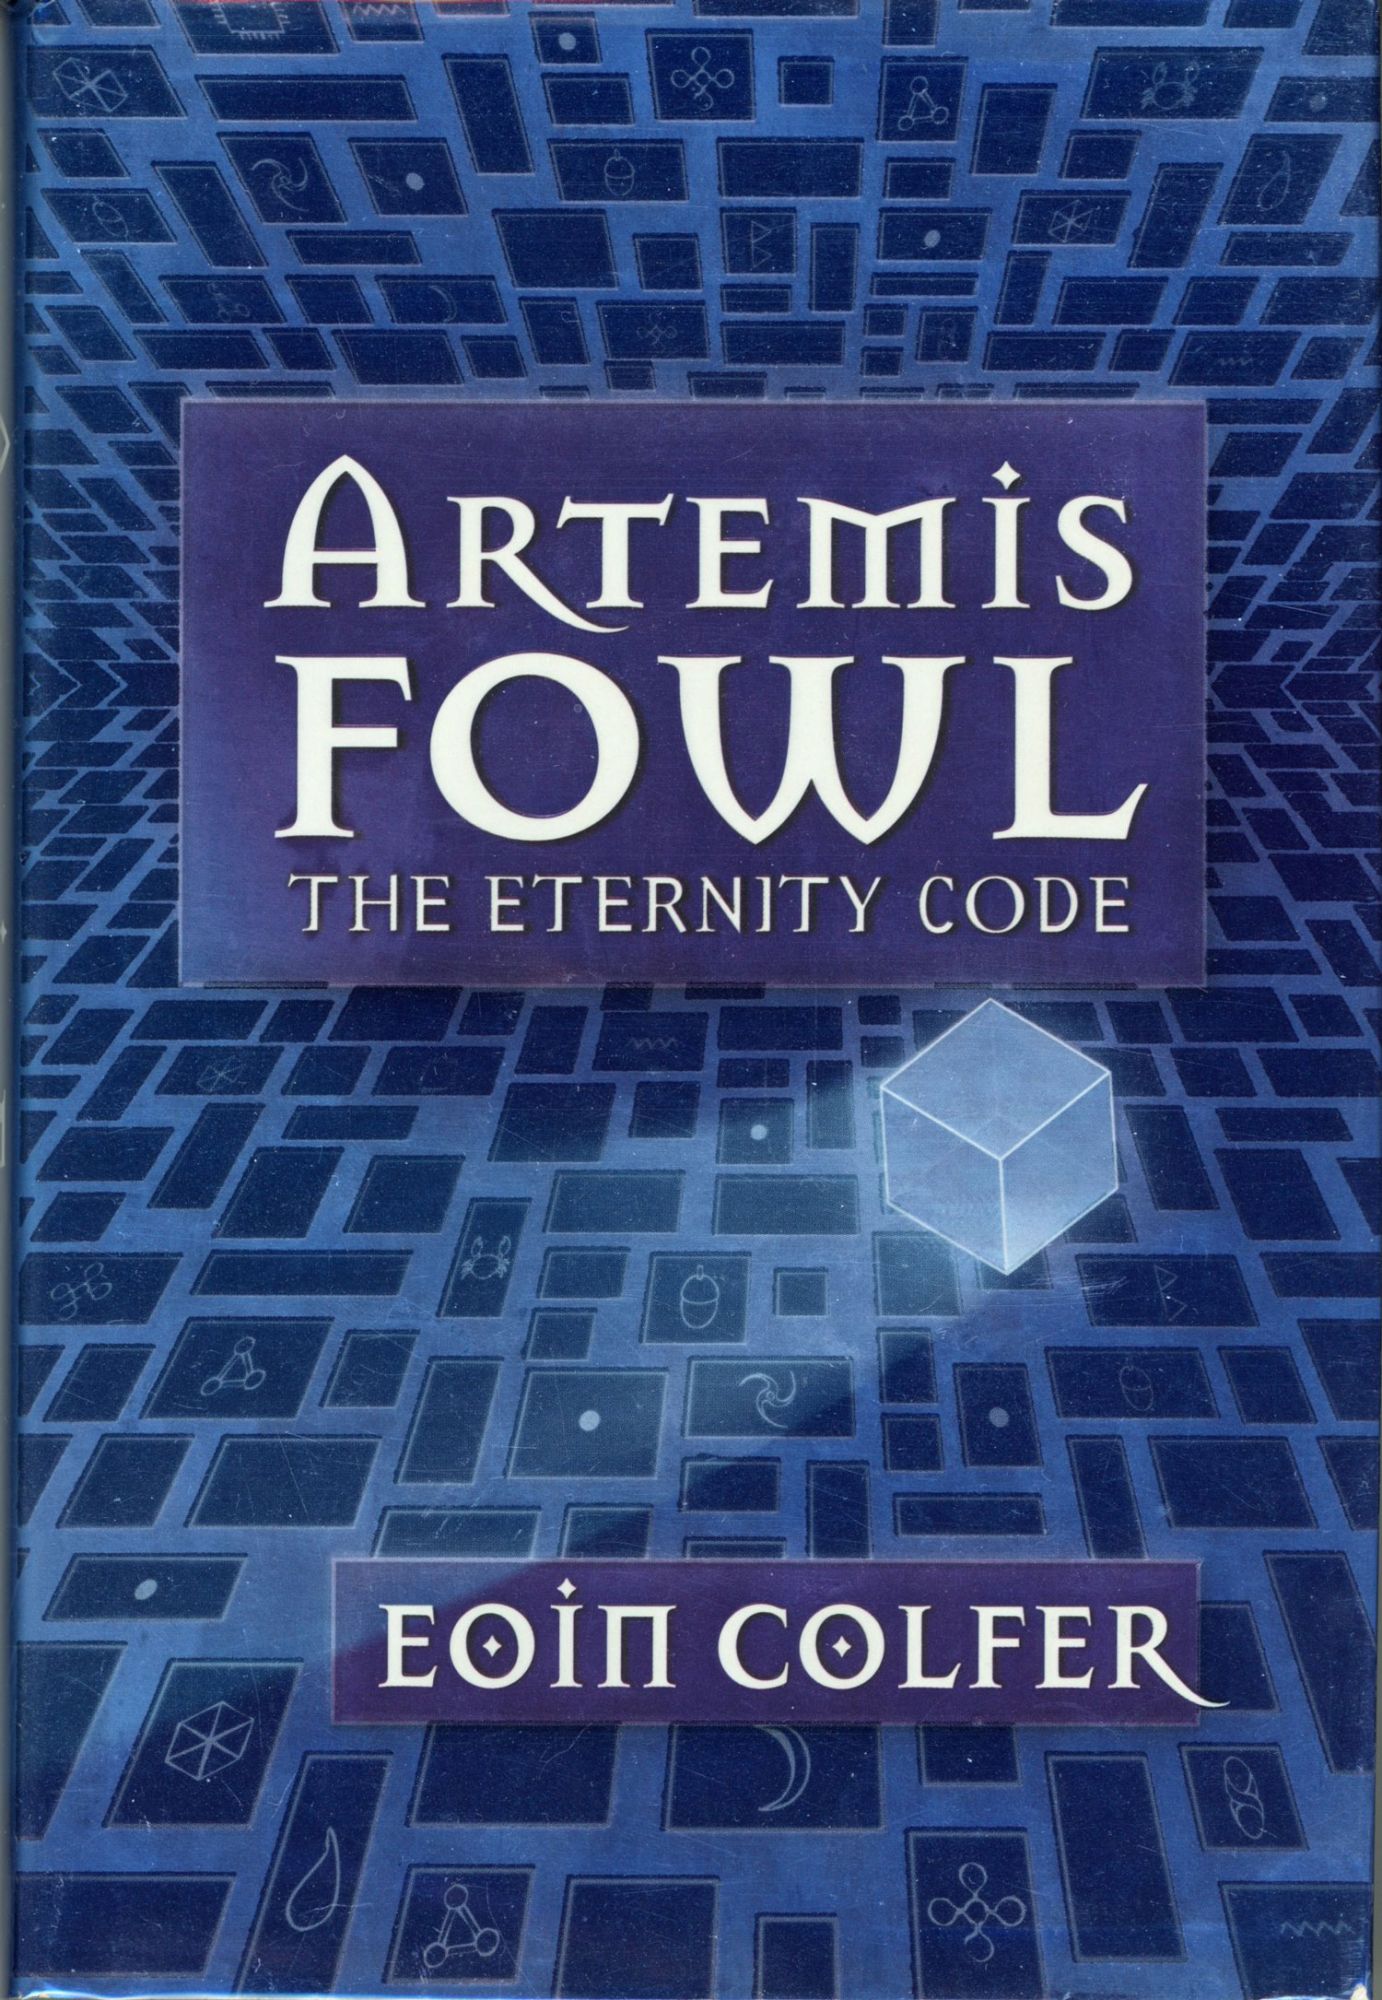 Artemis Fowl Disney Hyperion by Eoin Colfer | Paperback